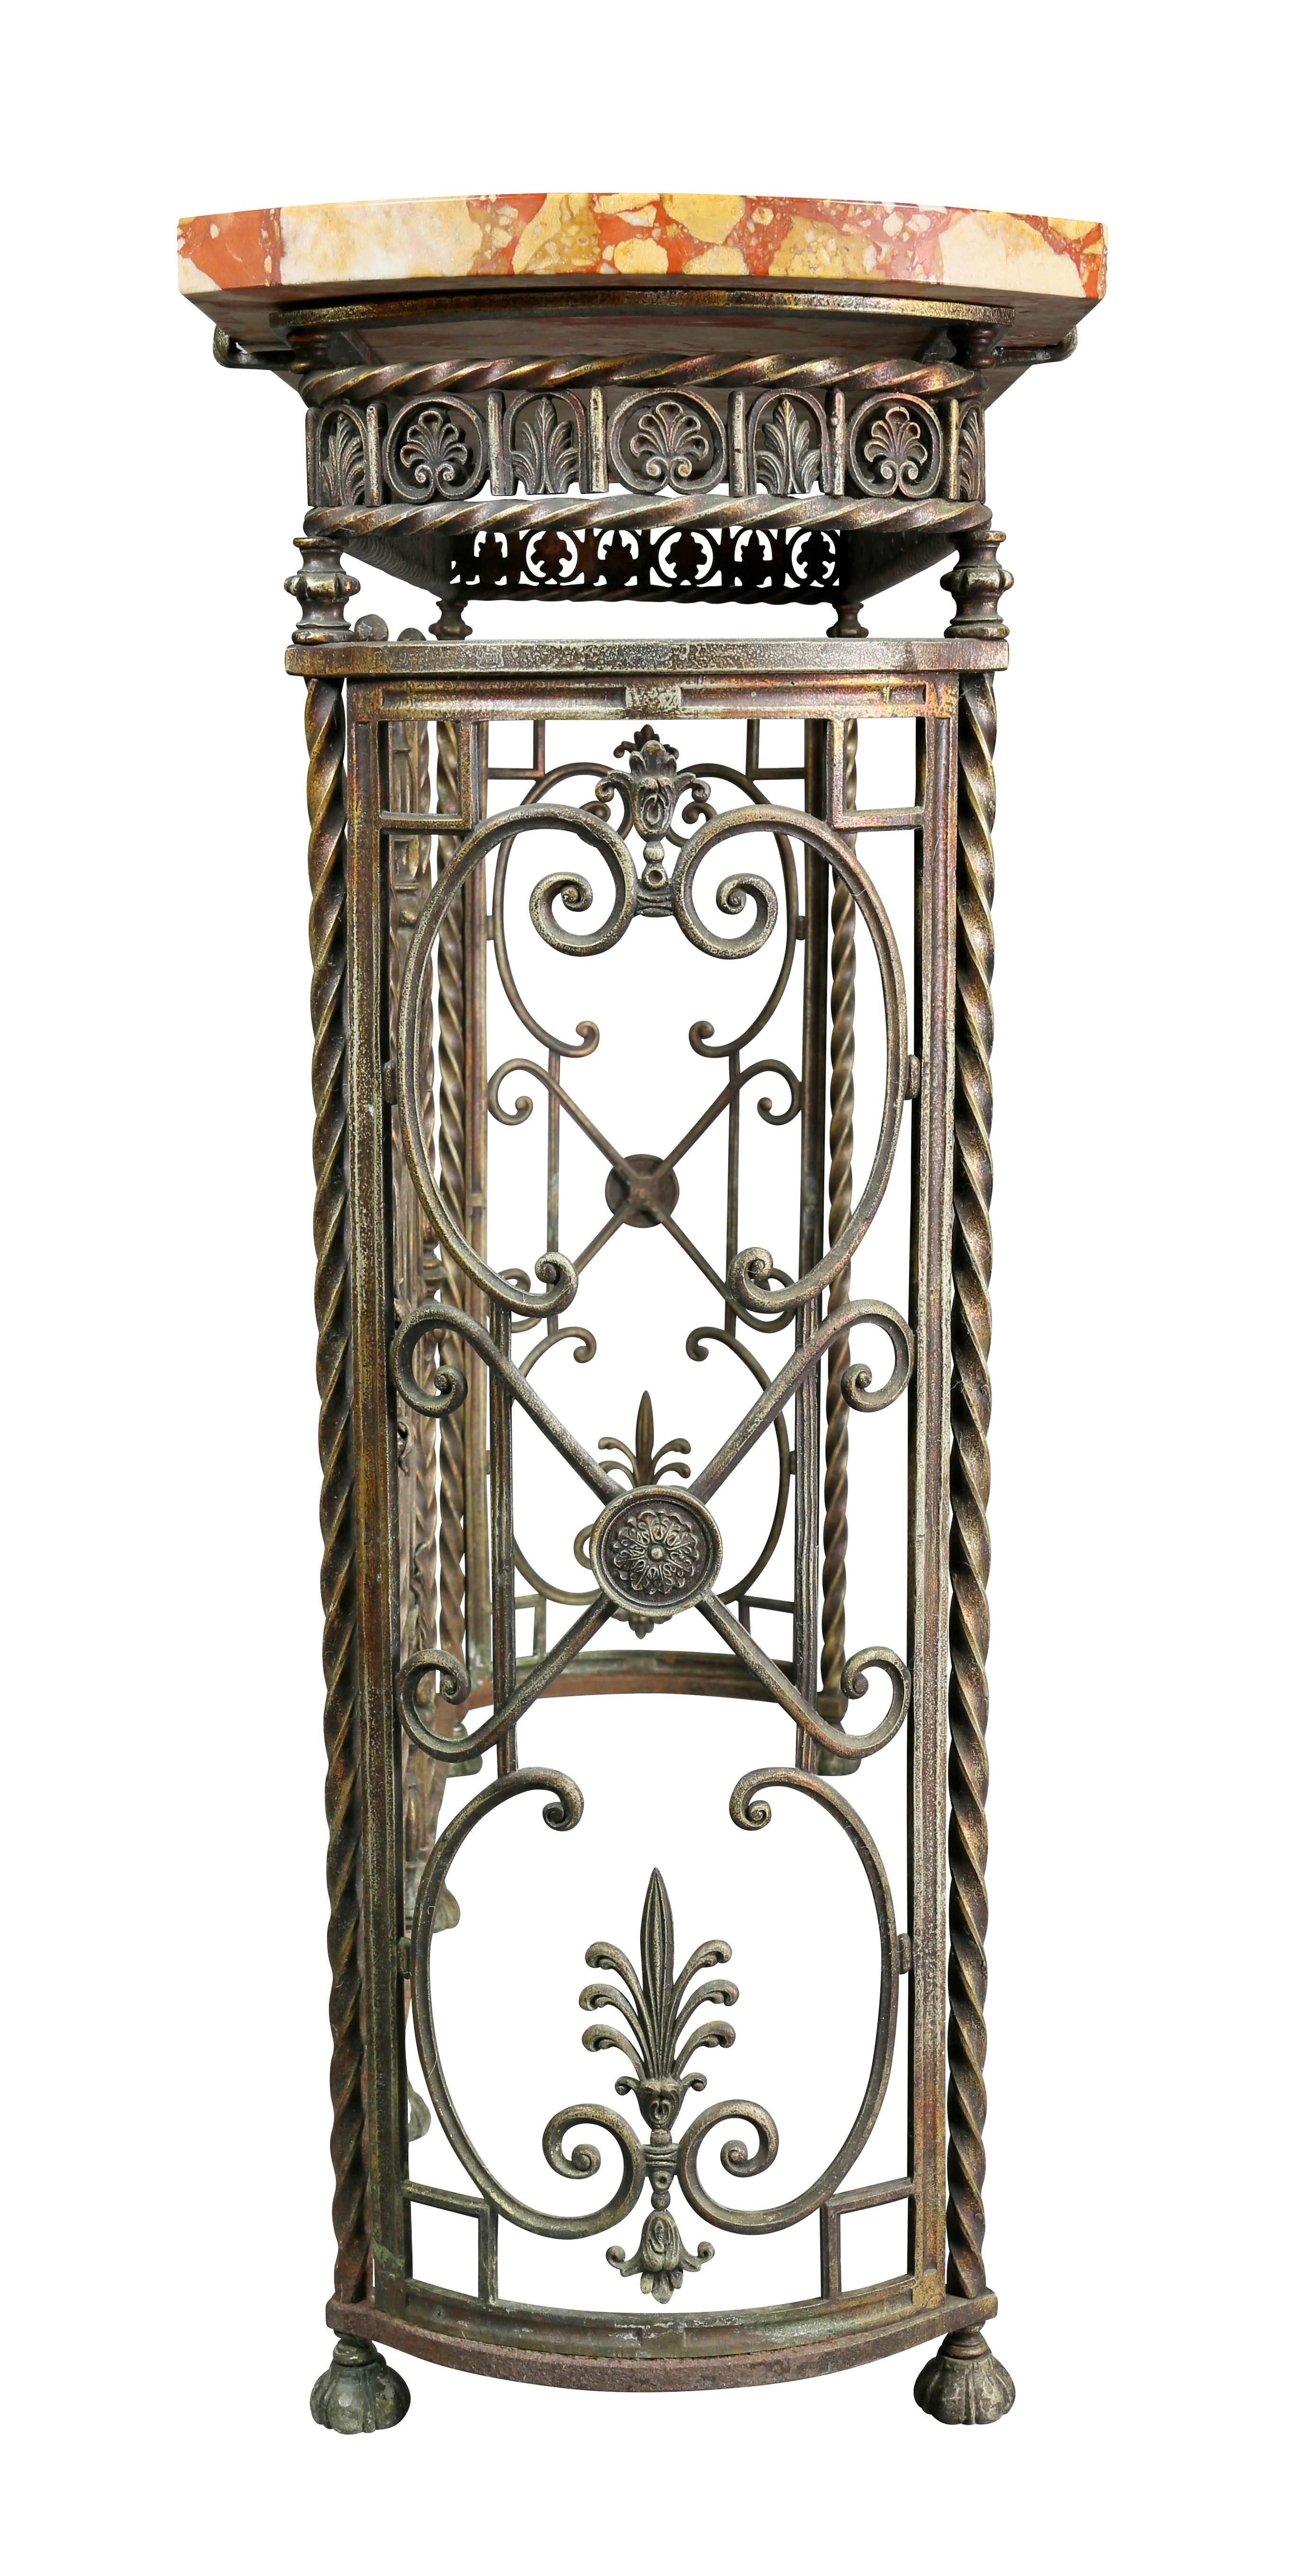 Early 20th Century Wrought Iron Console/ Radiator Cover